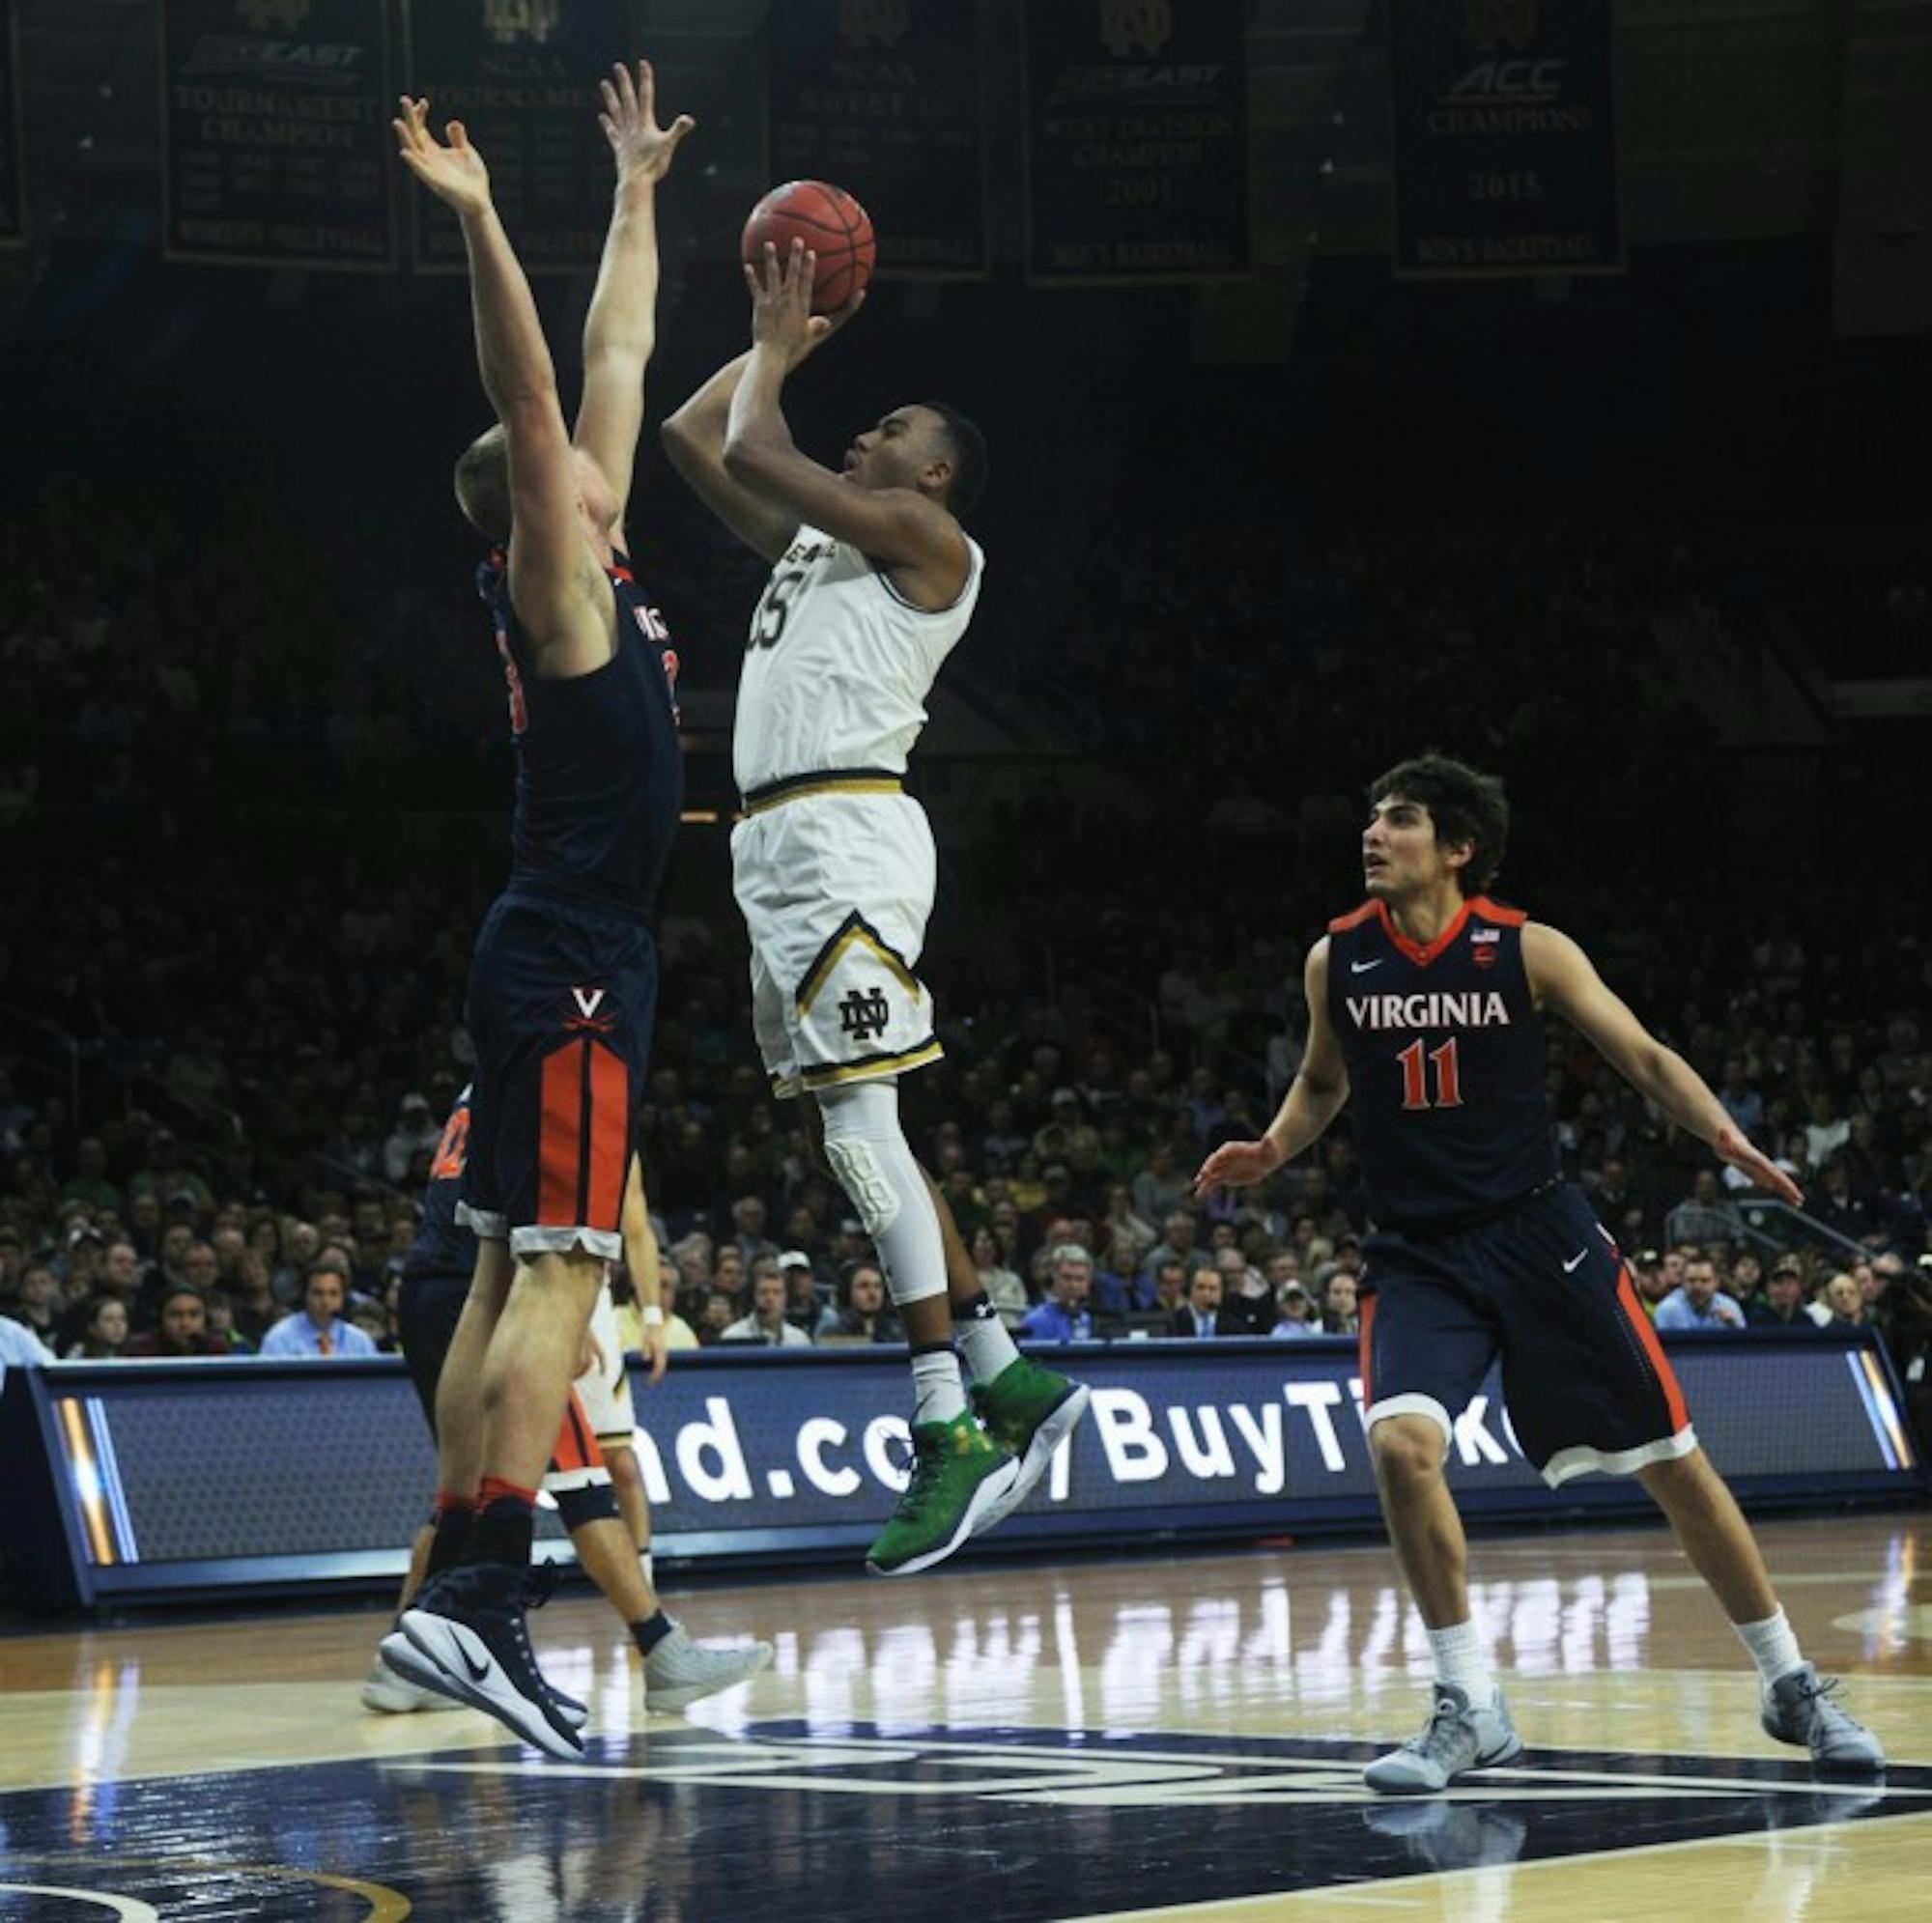 Irish junior forward Bonzie Colson shoots over a Virginia defender during Notre Dame’s 71-54 loss to the Cavaliers on Jan. 24 at Purcell Pavilion. Colson paced the Irish with 27 points and 16 rebounds Tuesday.